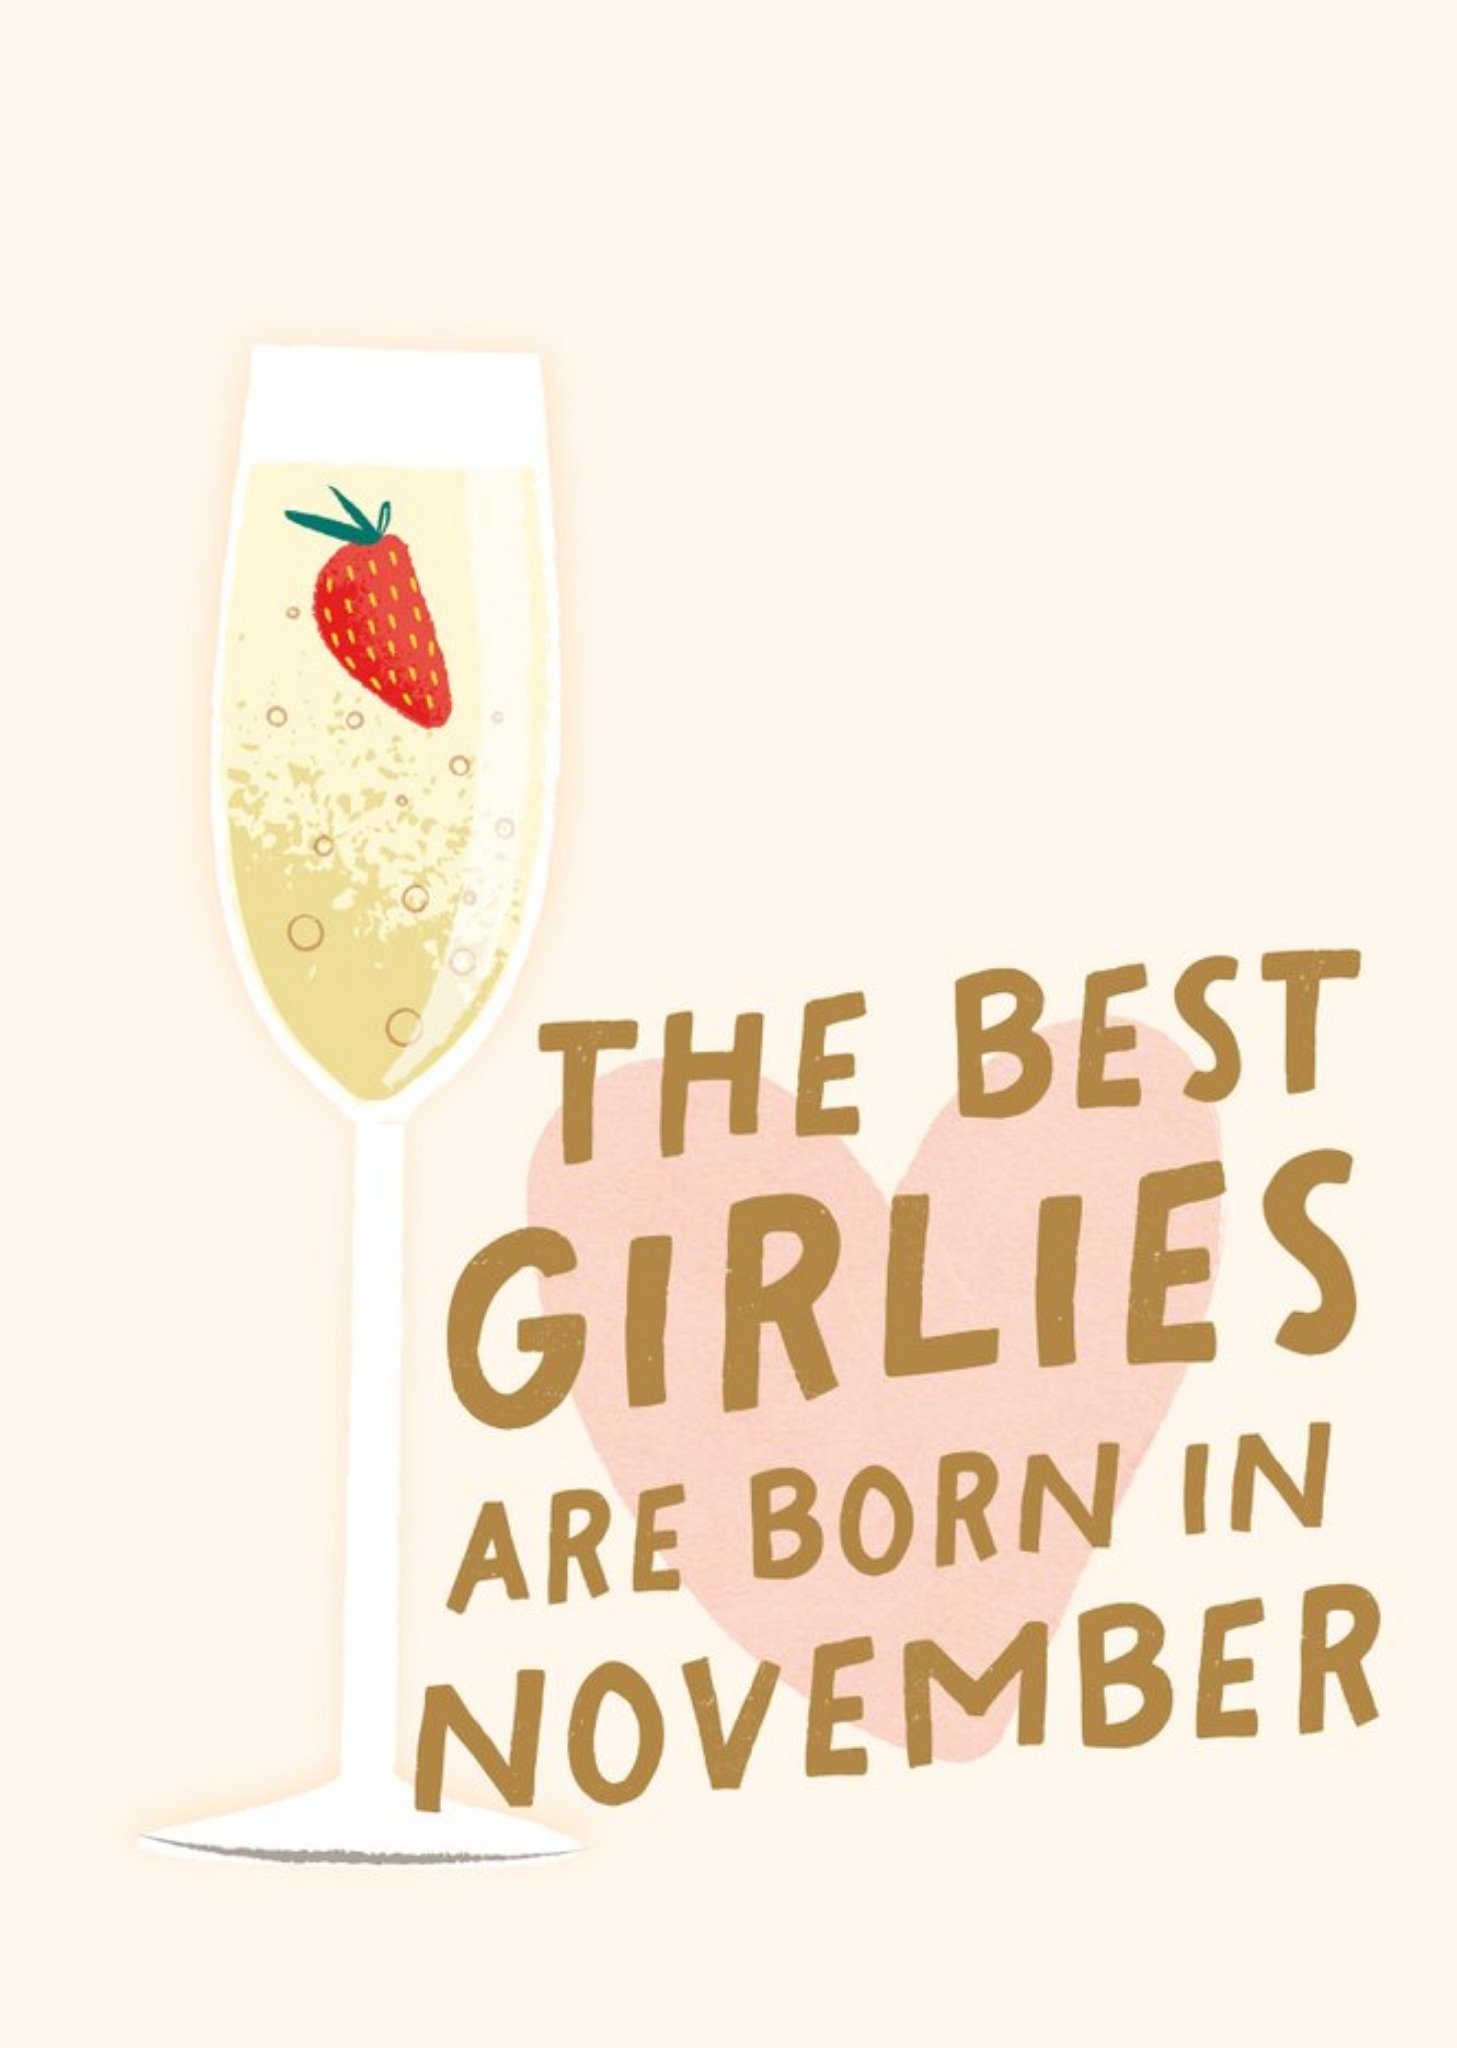 The London Studio Illustration Of A Glass Of Wine The Best Girlies Are Born In November Birthday Car